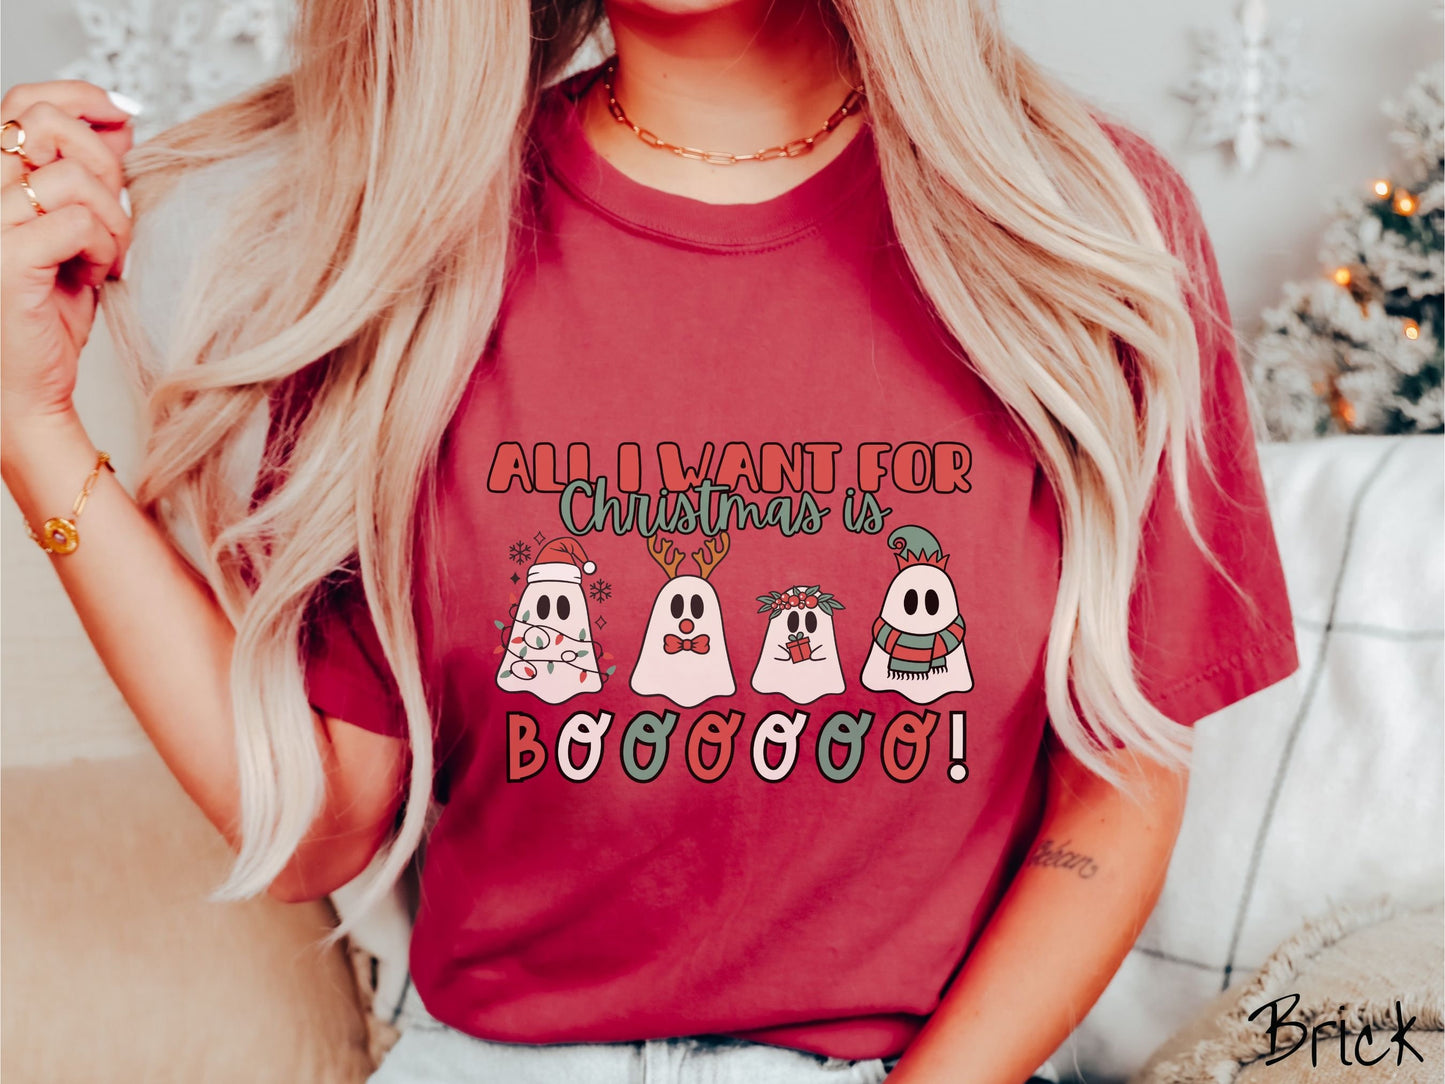 Comfort Colors Shirt, All I Want for Christmas is Boo, Christmas Ghosts, Festive Ghosts, Creepy Holiday Shirt, Spooky and Merry